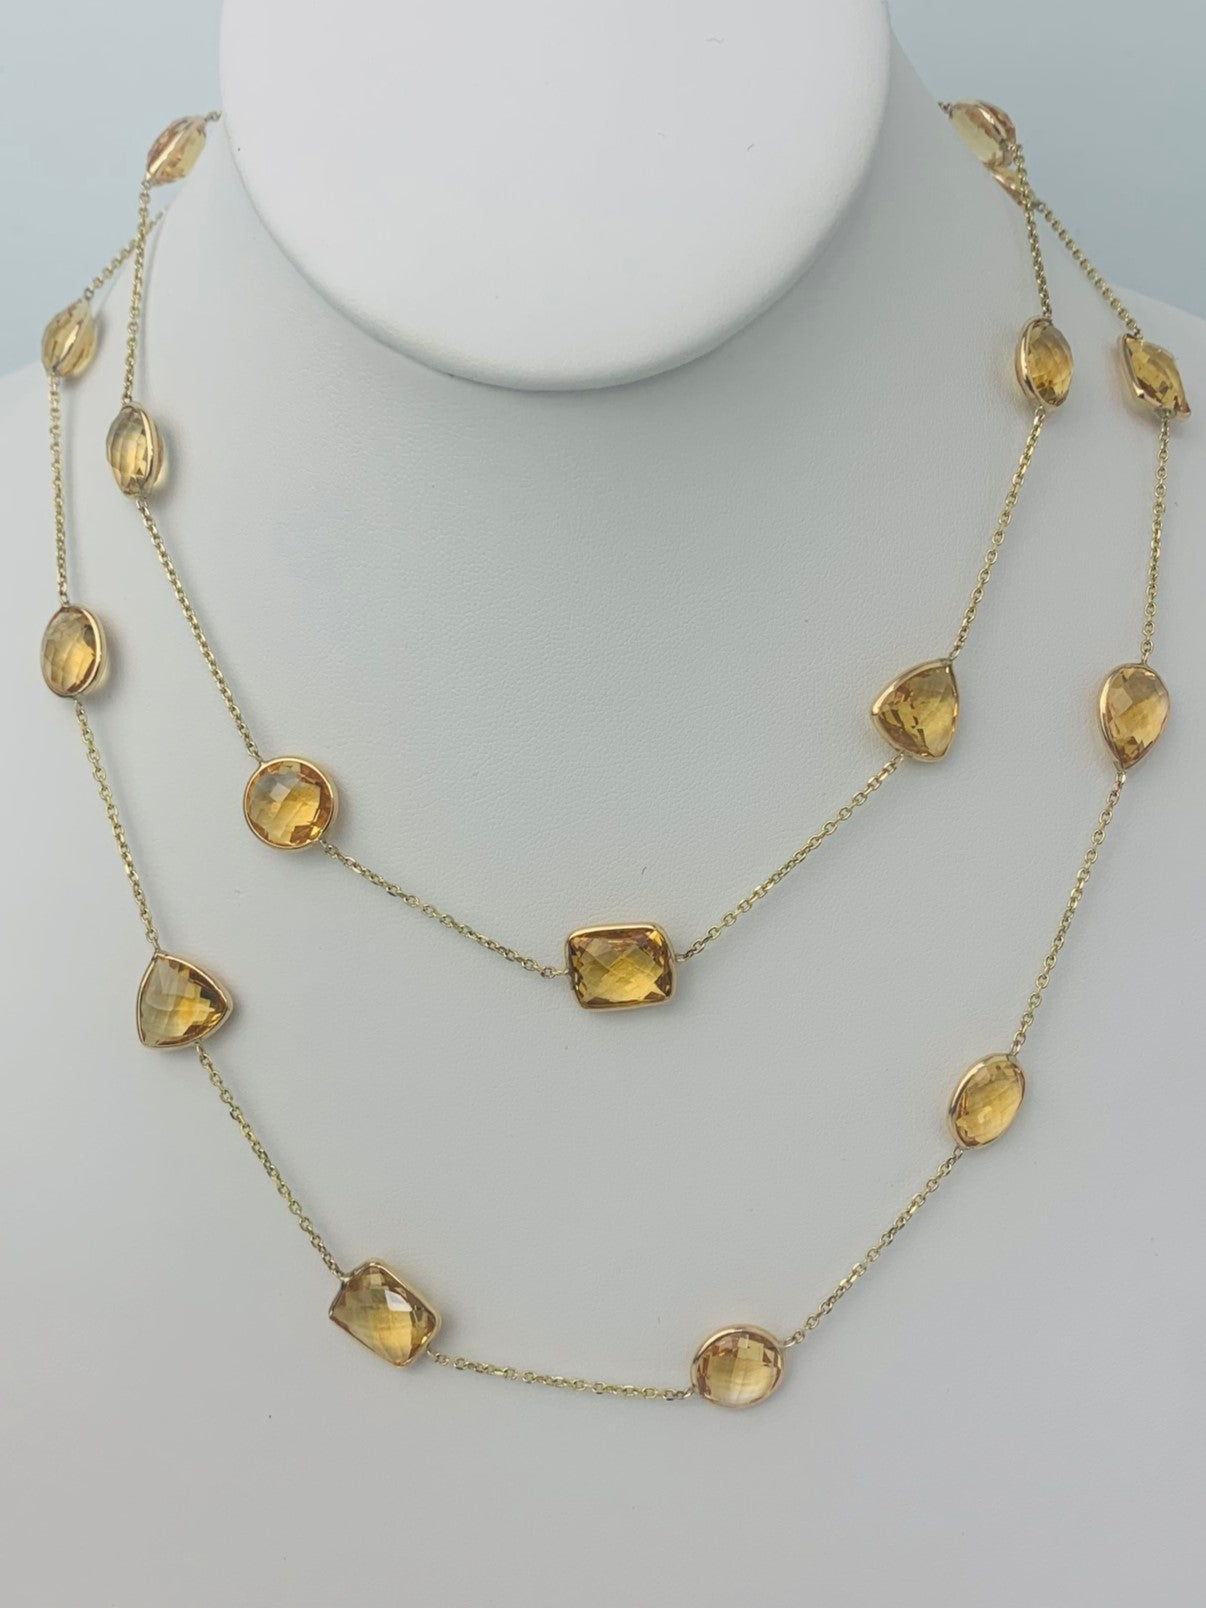 36" 20 Station Citrine Round, Pear, Trilliant, Oval and Rectangular Checkerboard Bezel Necklace in 14KY - NCK-177-BZGM14Y-CIT-36